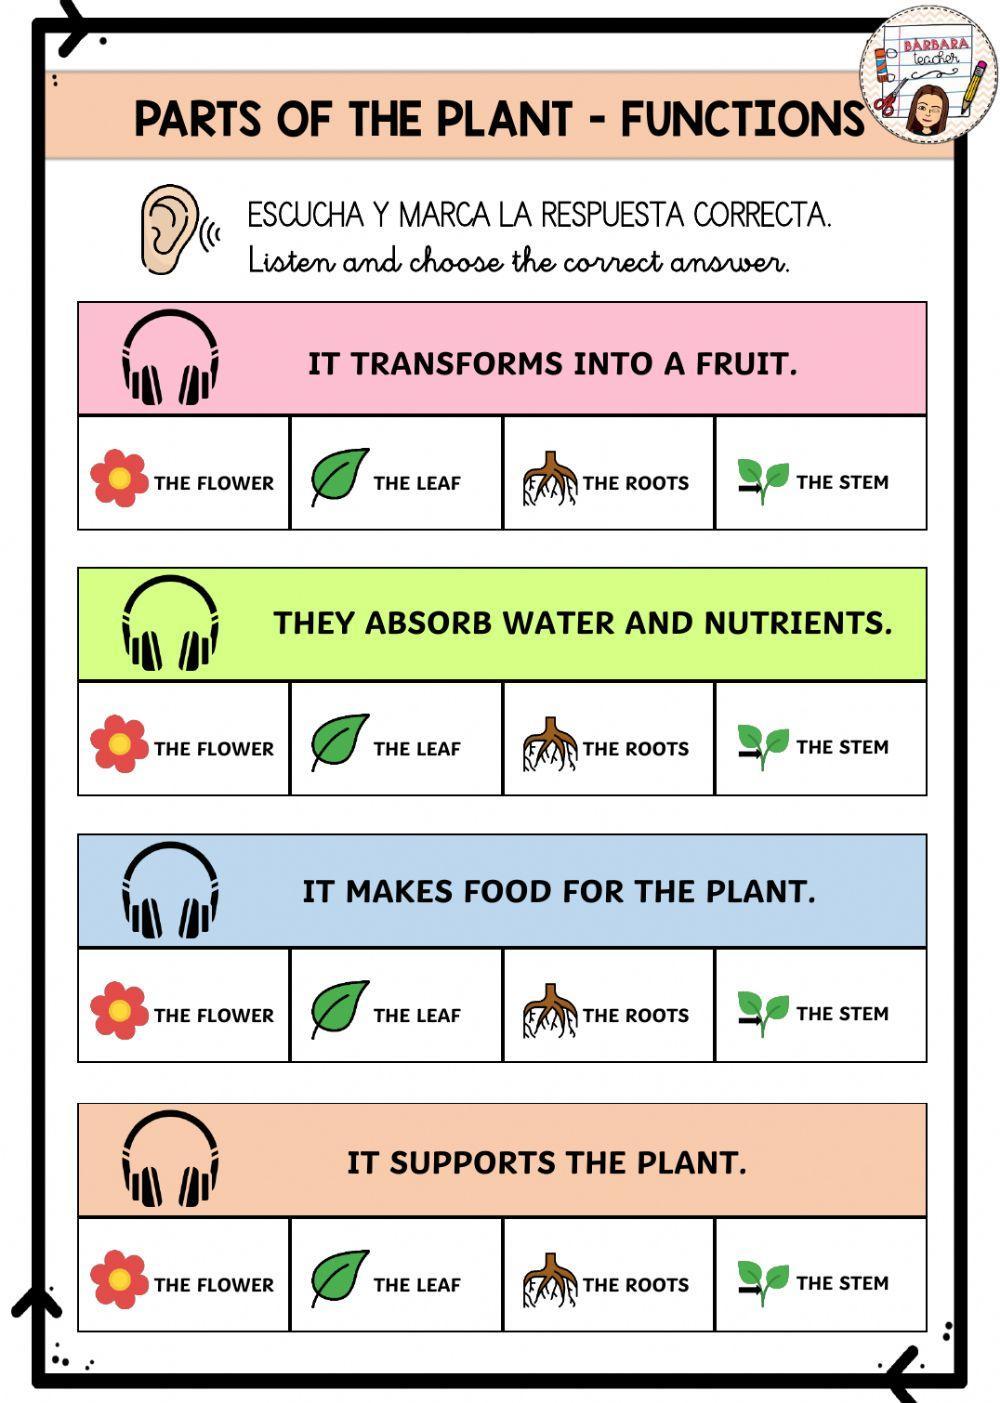 Part of the plant functions